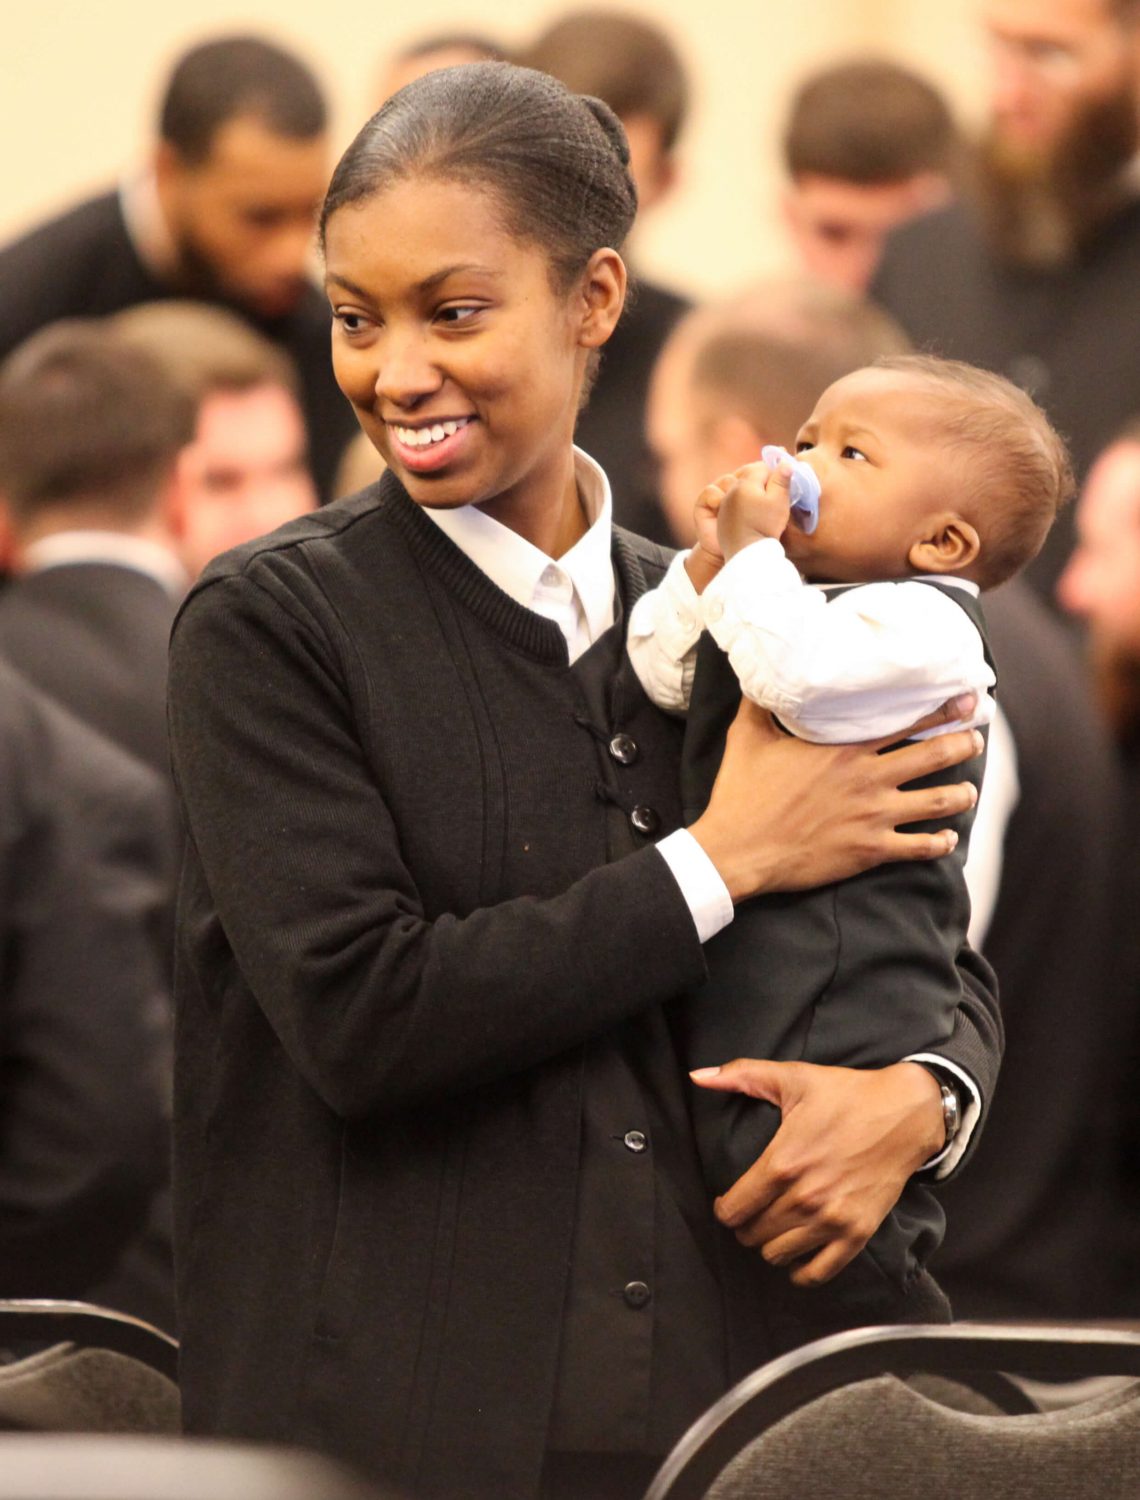 Sis Meghan with baby 2410